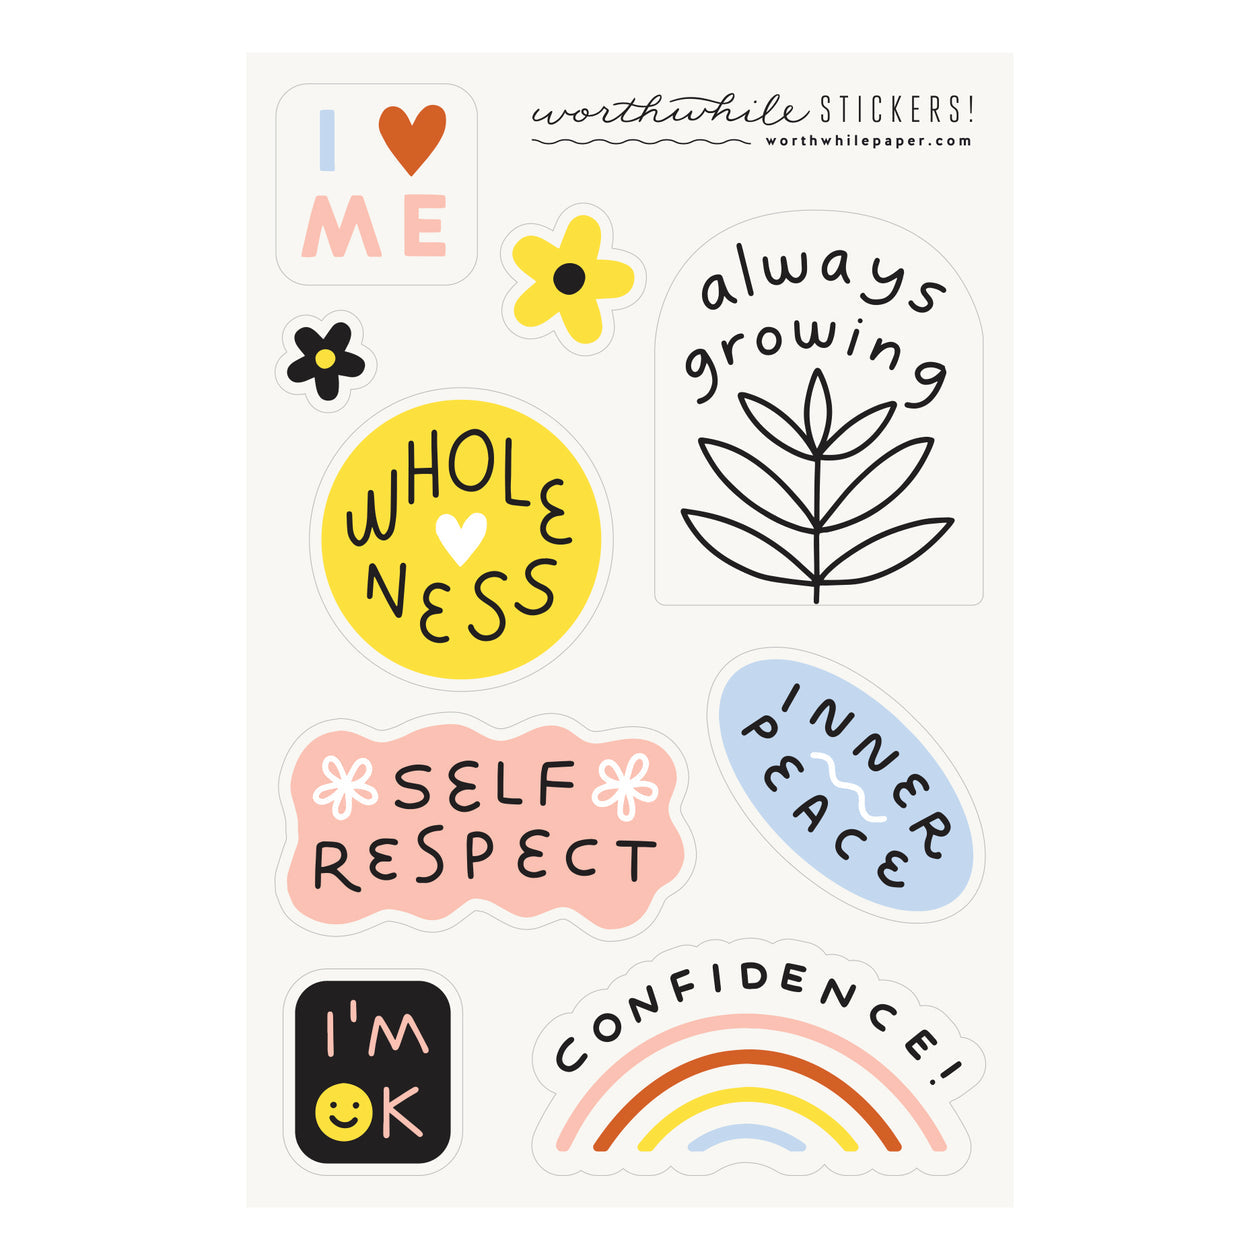 Sticker sheets are great to have on hand for sending snail mail, decorating gifts, and to enliven a laptop, water bottle, or whatever the heart desires.